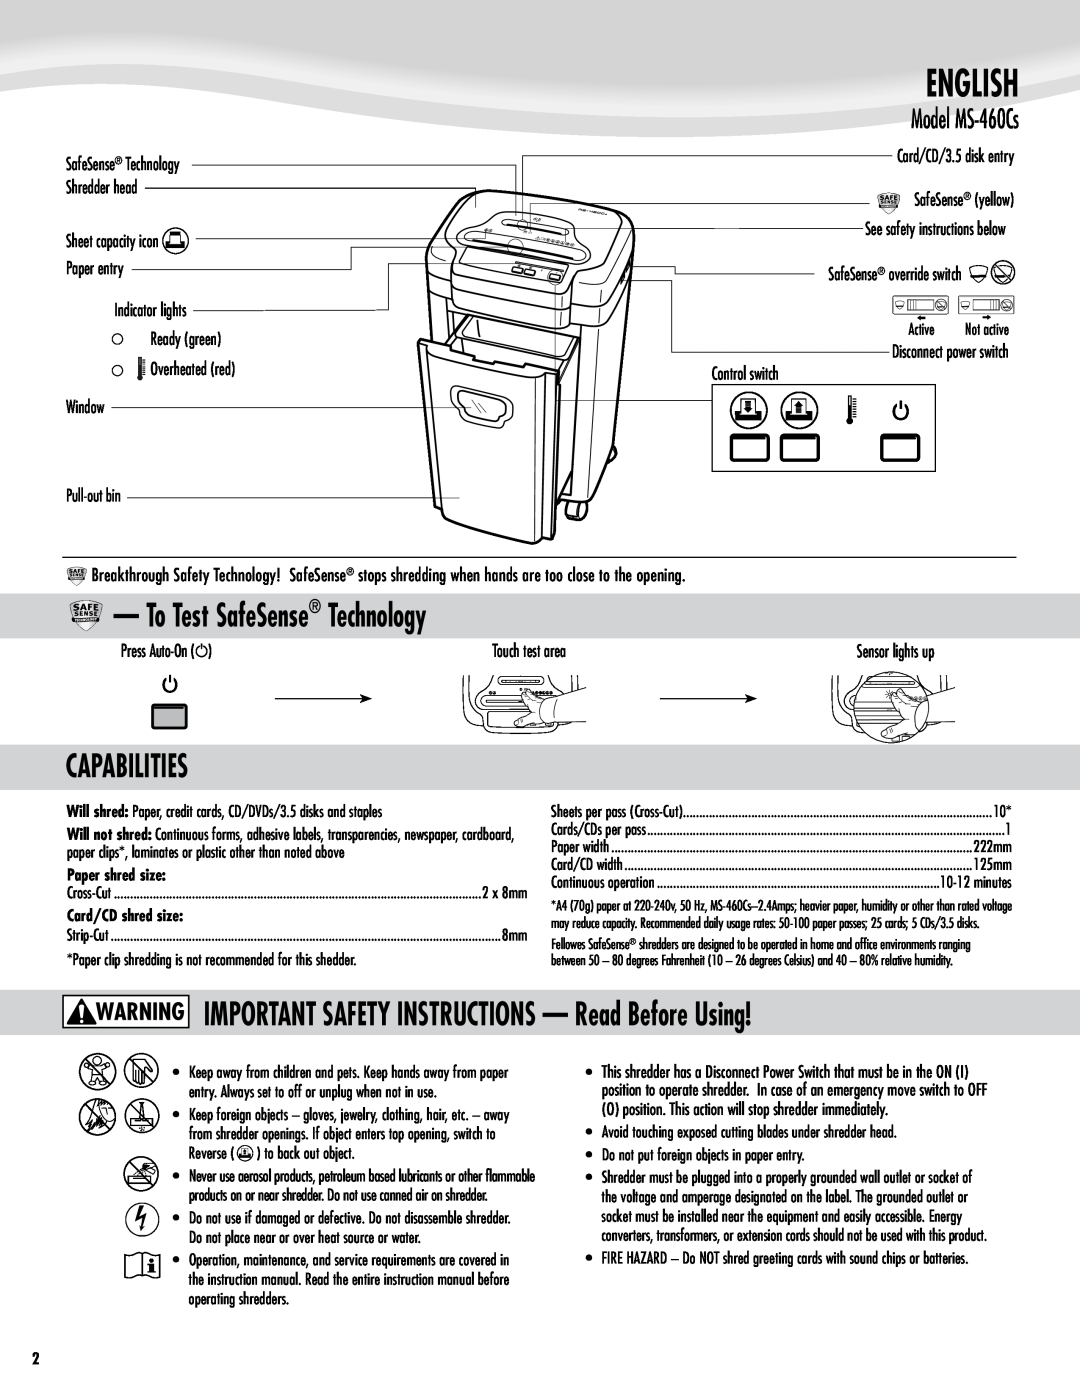 Fellowes Model MS-460Cs manual English, To Test SafeSense Technology, Capabilities, Card/CD/3.5 disk entry SafeSense yellow 